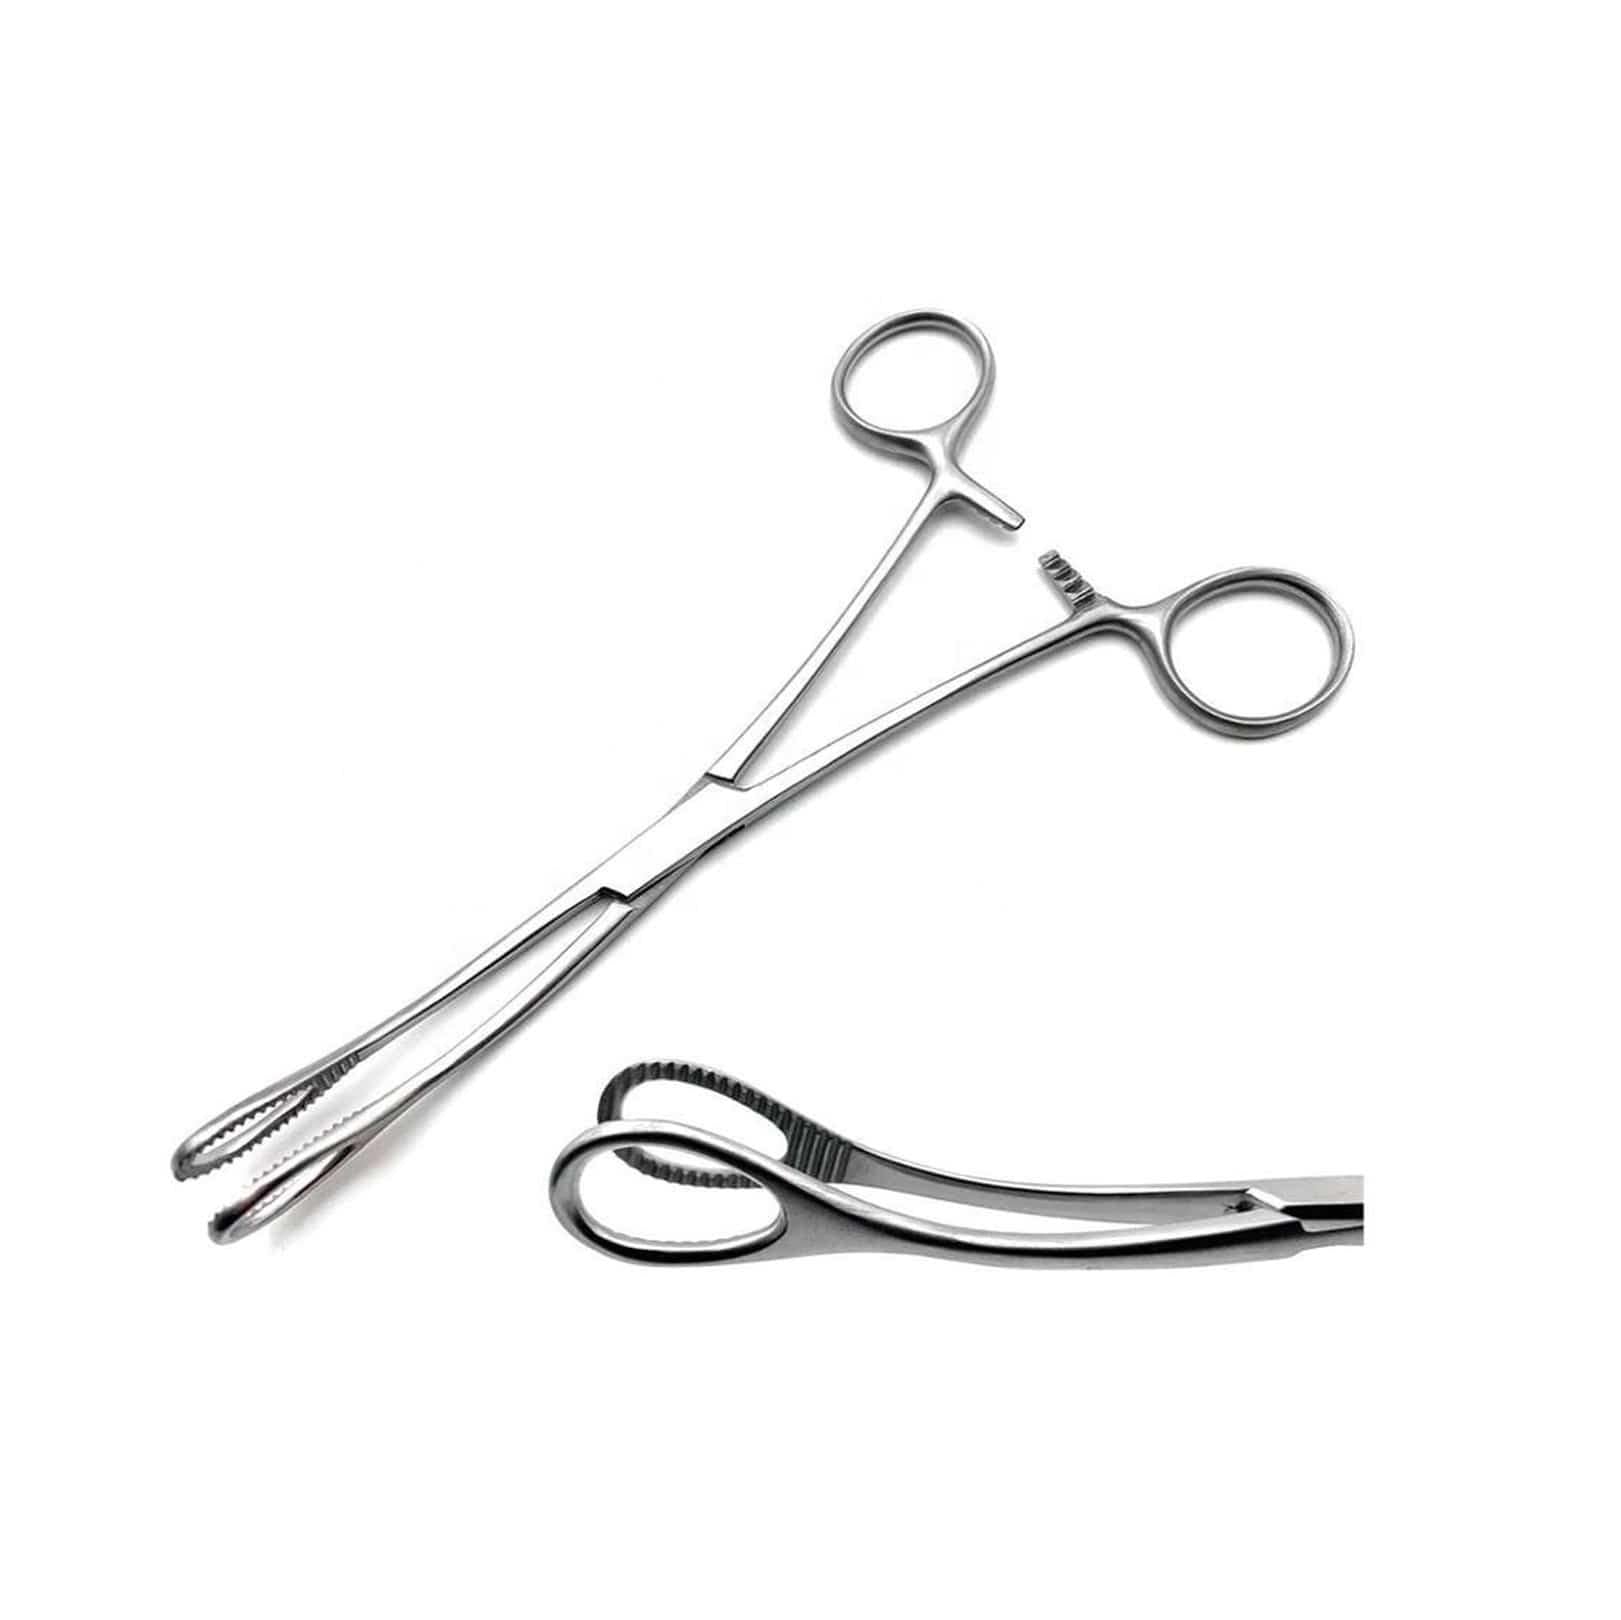 Armo Surgical Instruments Armo Foerster Forceps